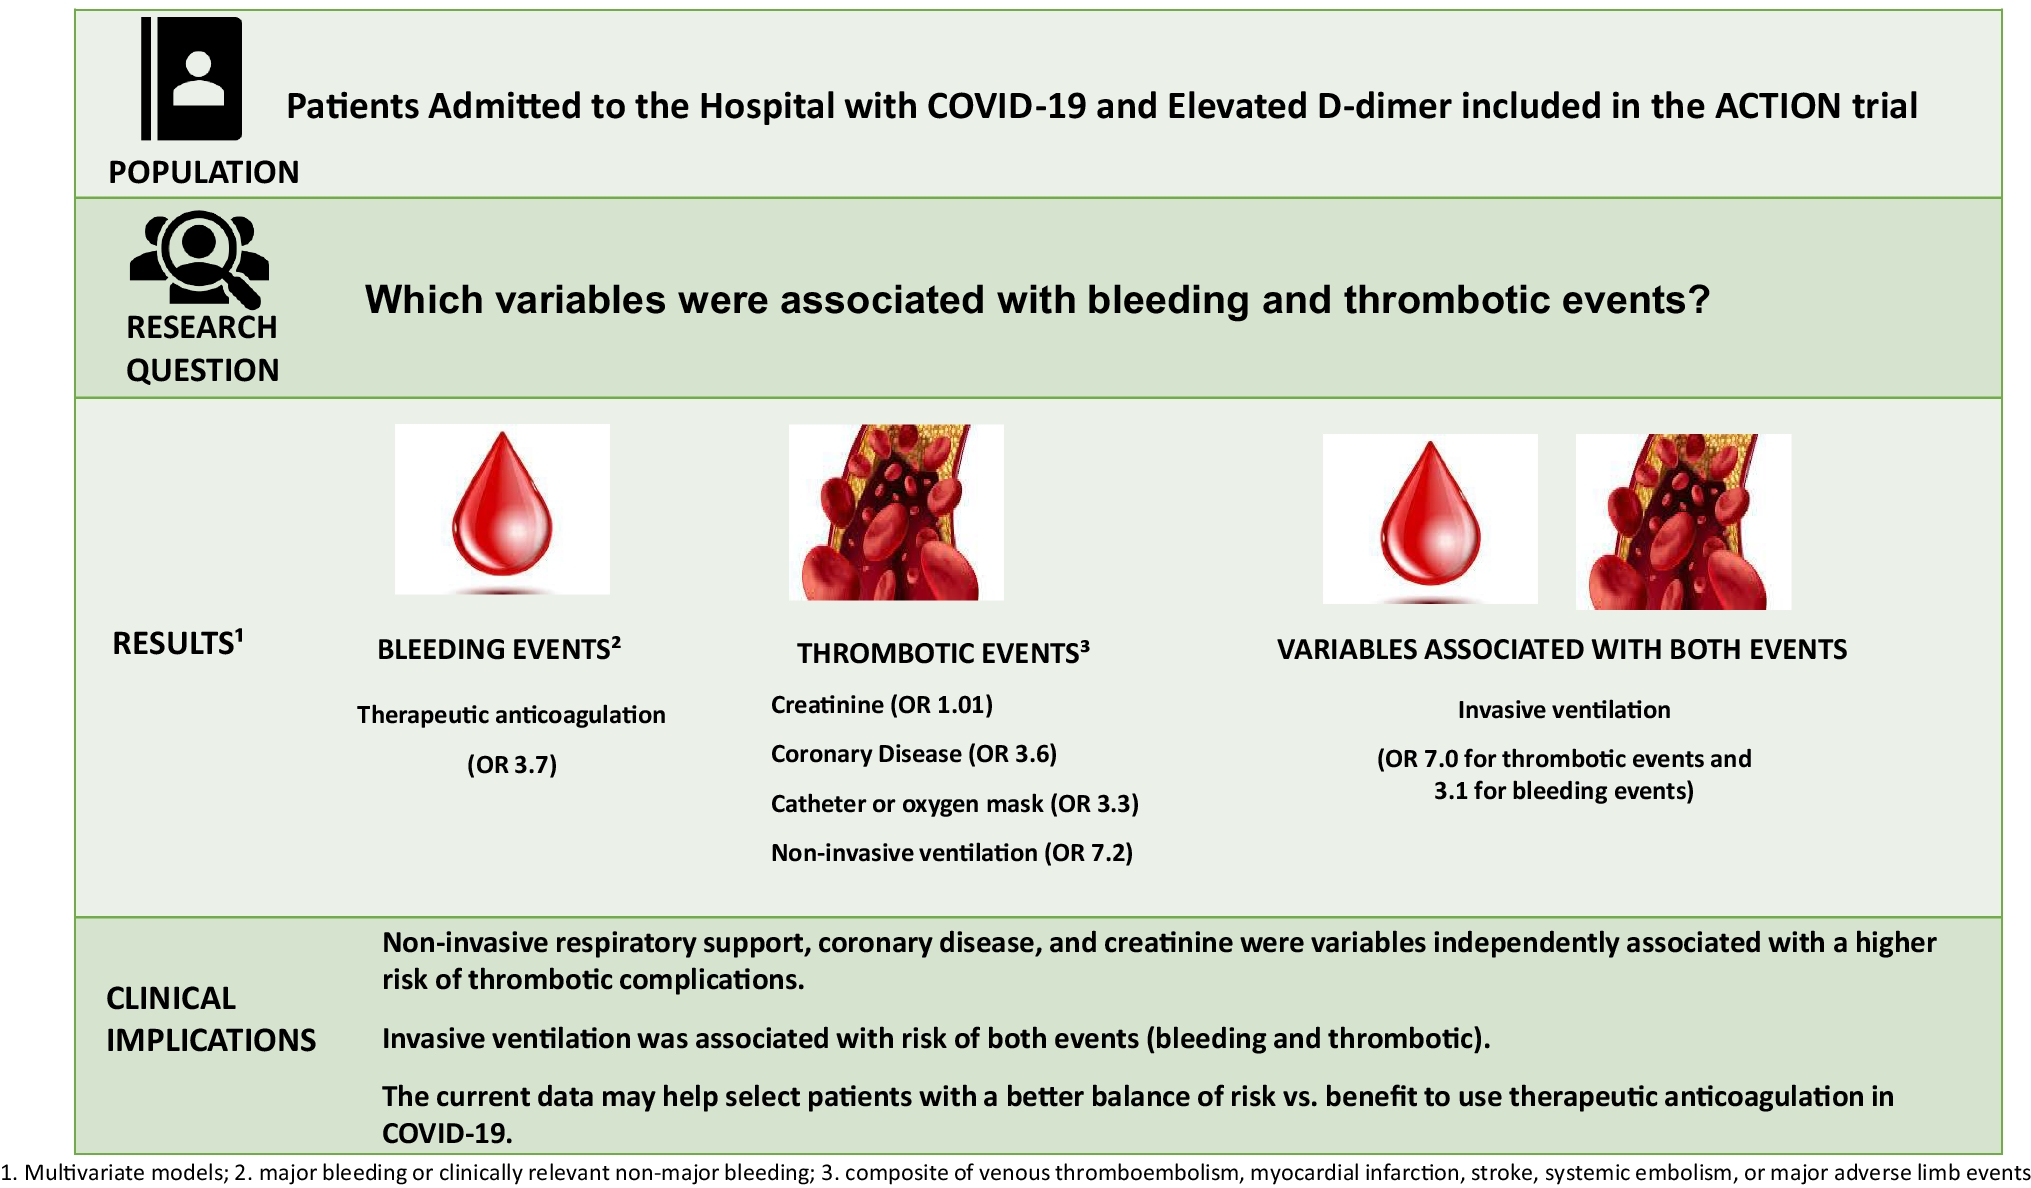 Predictors of bleeding and thrombotic events among patients admitted to the hospital with COVID-19 and elevated D-dimer: insights from the ACTION randomized clinical trial